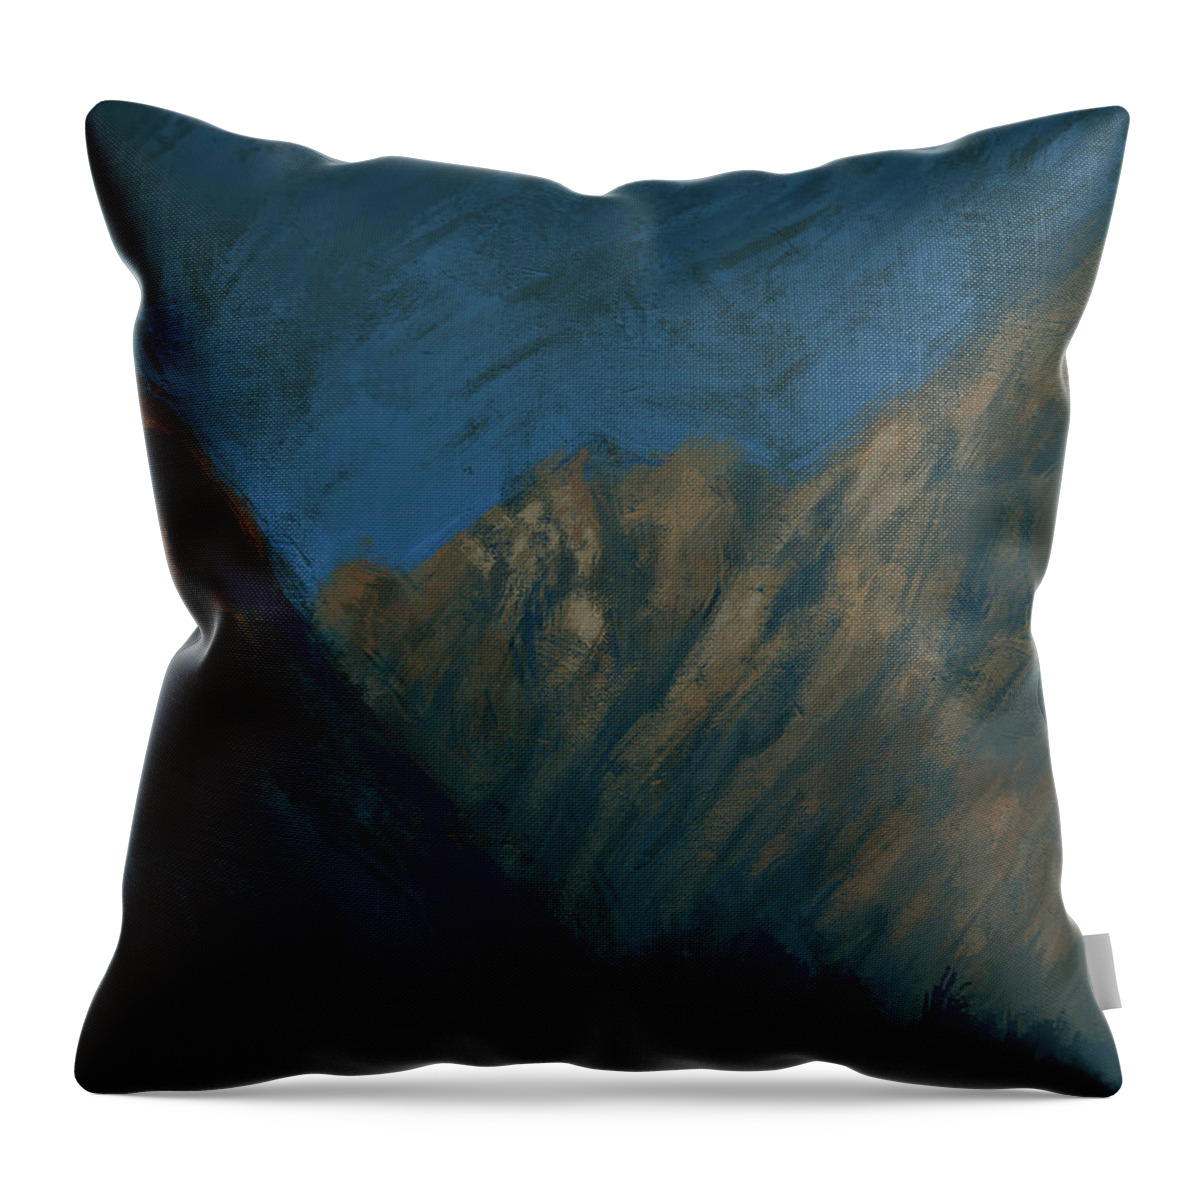 Lightbetweenshadows Lights Shados Between Mountains Valley Desertnigth Desertscape Landscape Skyscape Nightsky Nightscape Impressionism Impressions Expresionism Abstract Abstractpainting Abstractart Atacamadesert Desiertoatacama Throw Pillow featuring the digital art Luz entre sombras by M A Ibanez